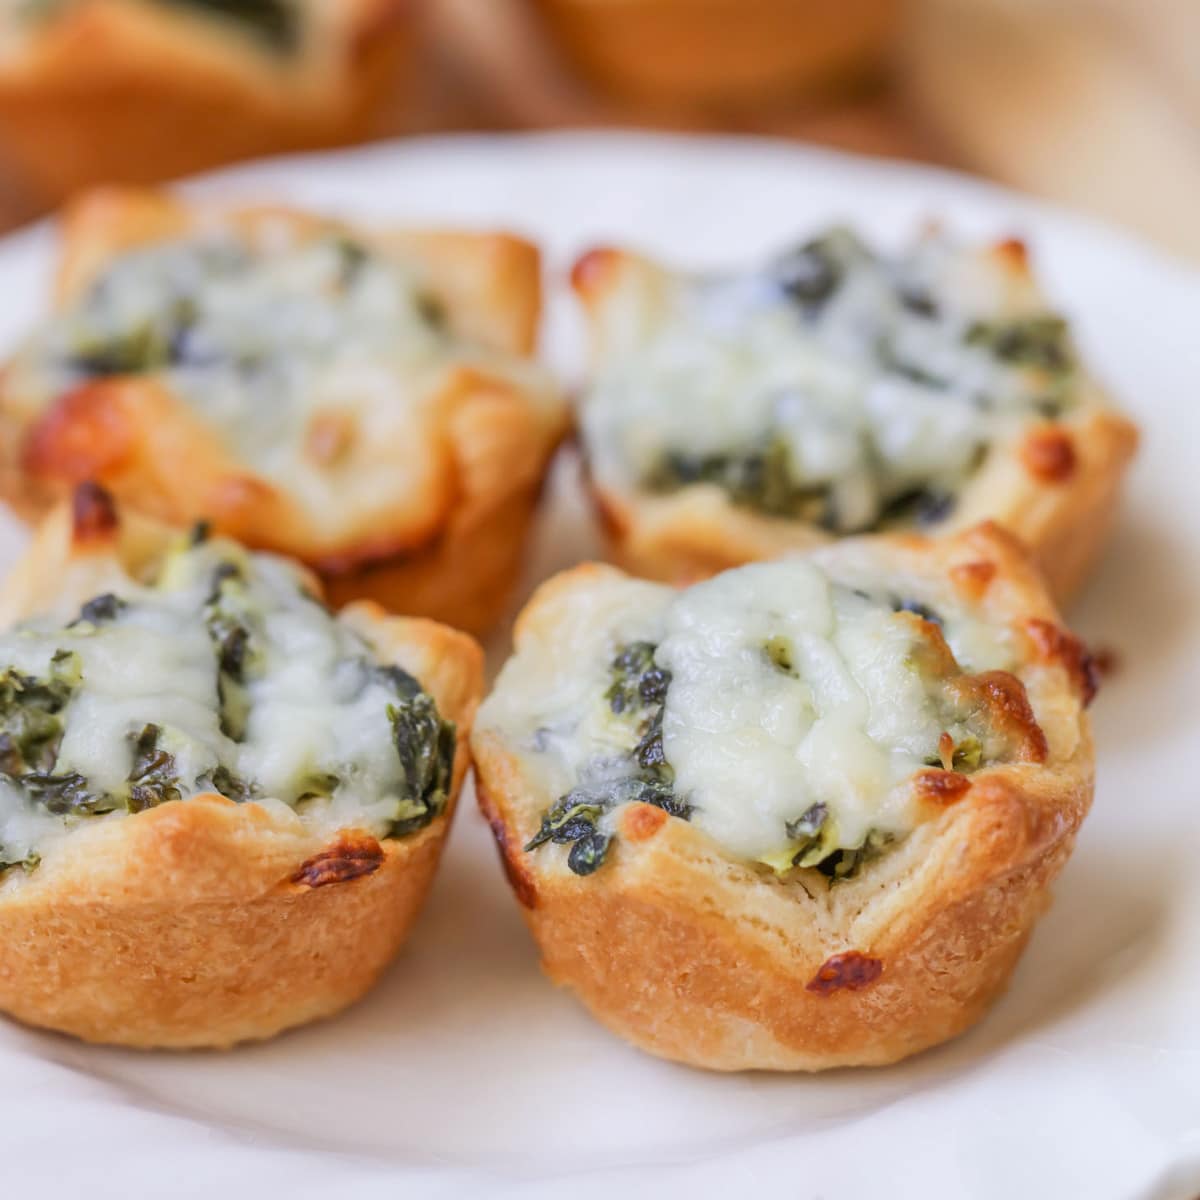 4th of July Appetizers - Spinach dip bites on a white plate.